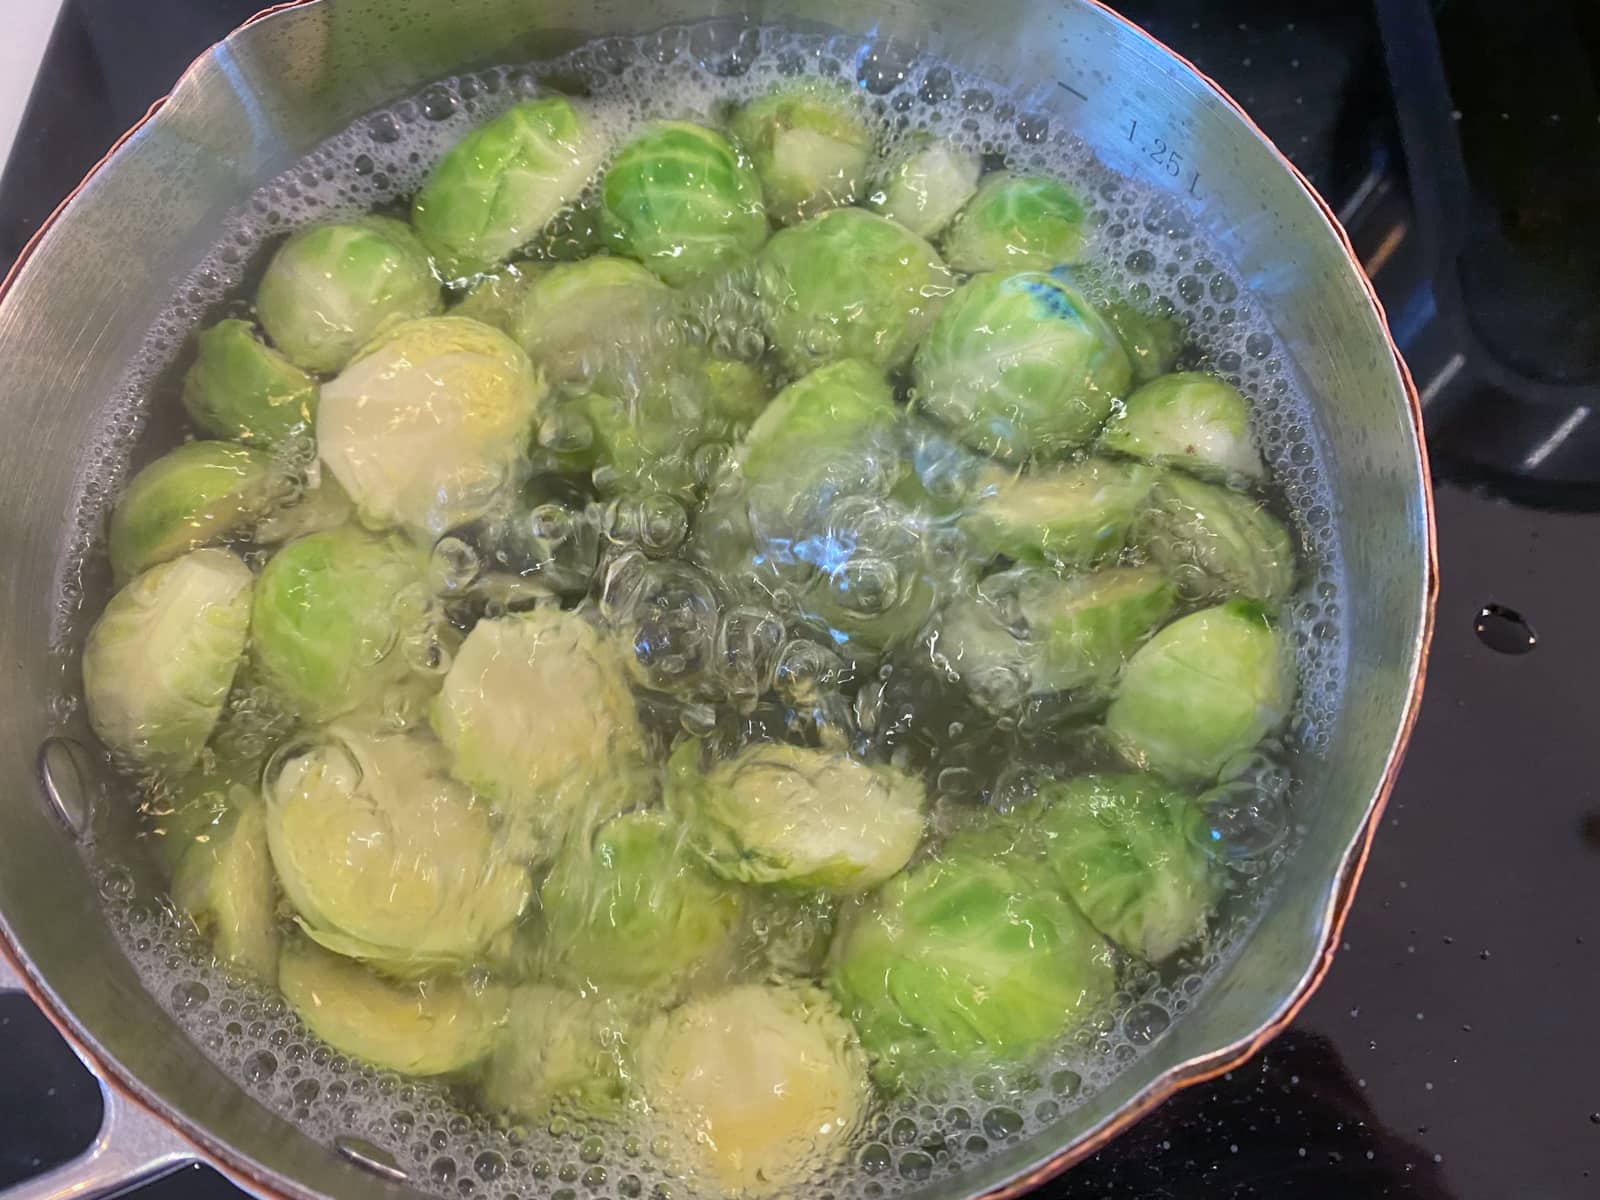 Brussel sprouts boiling in salted water.